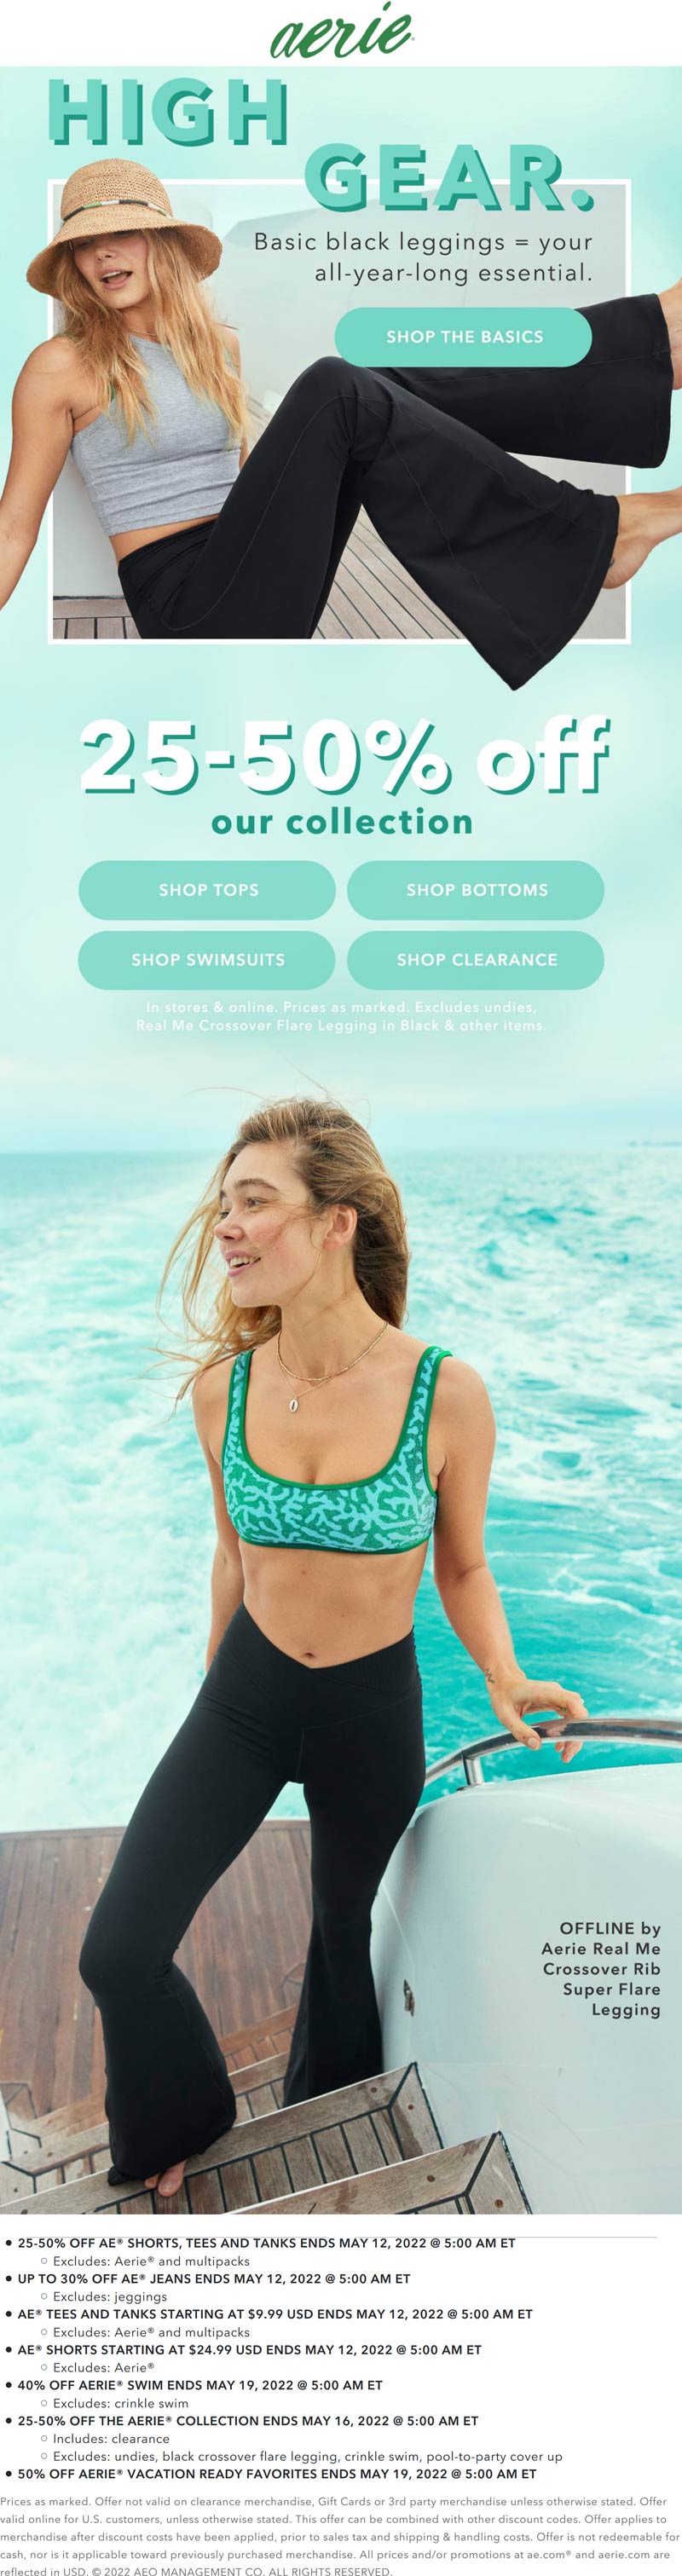 Aerie stores Coupon  25-50% off the collection at Aerie #aerie 